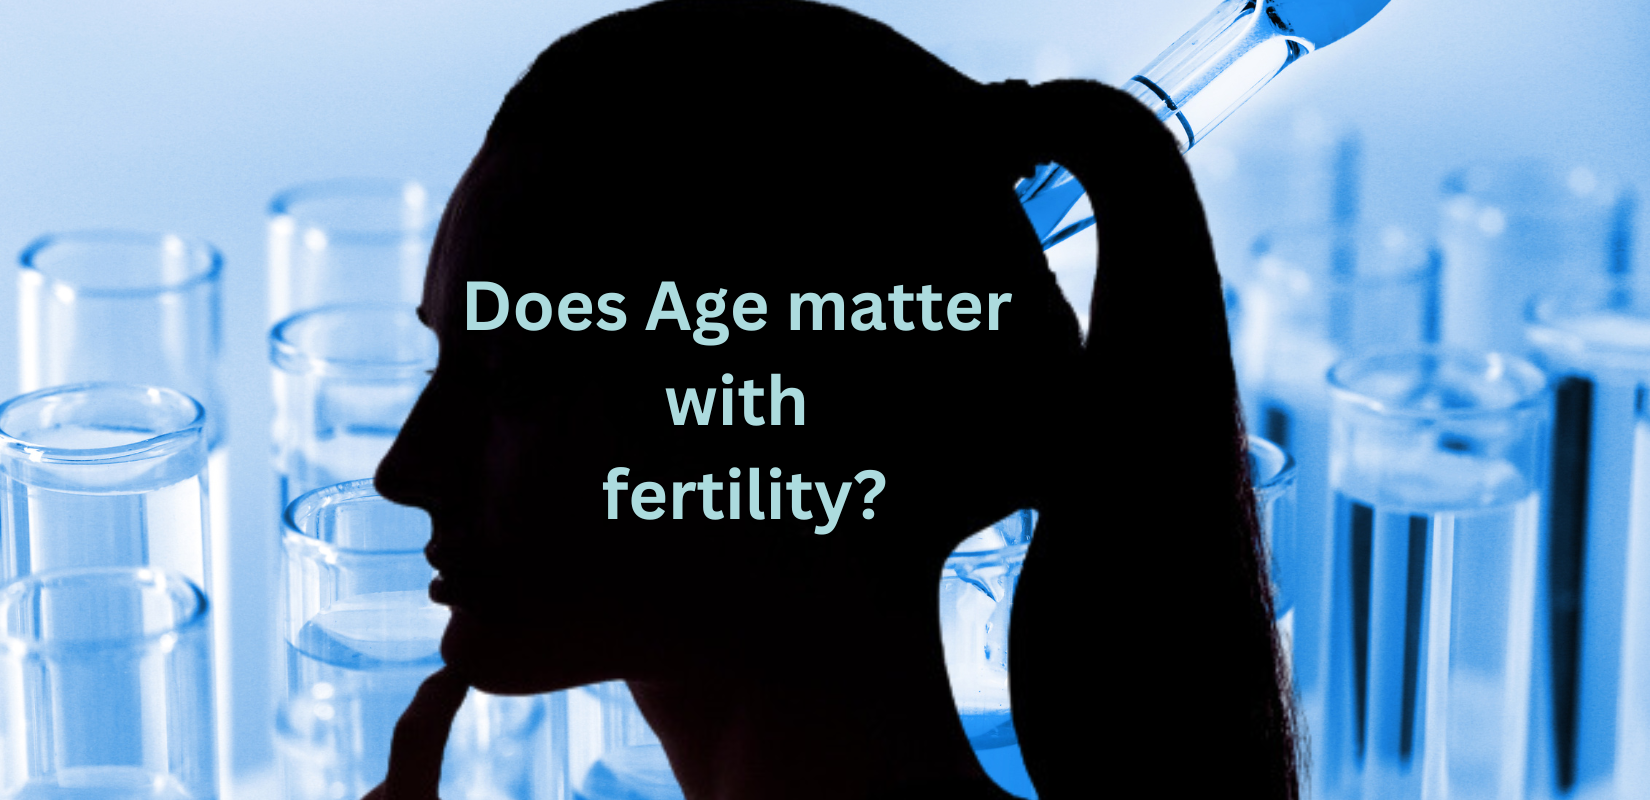 Does age matter with fertility?